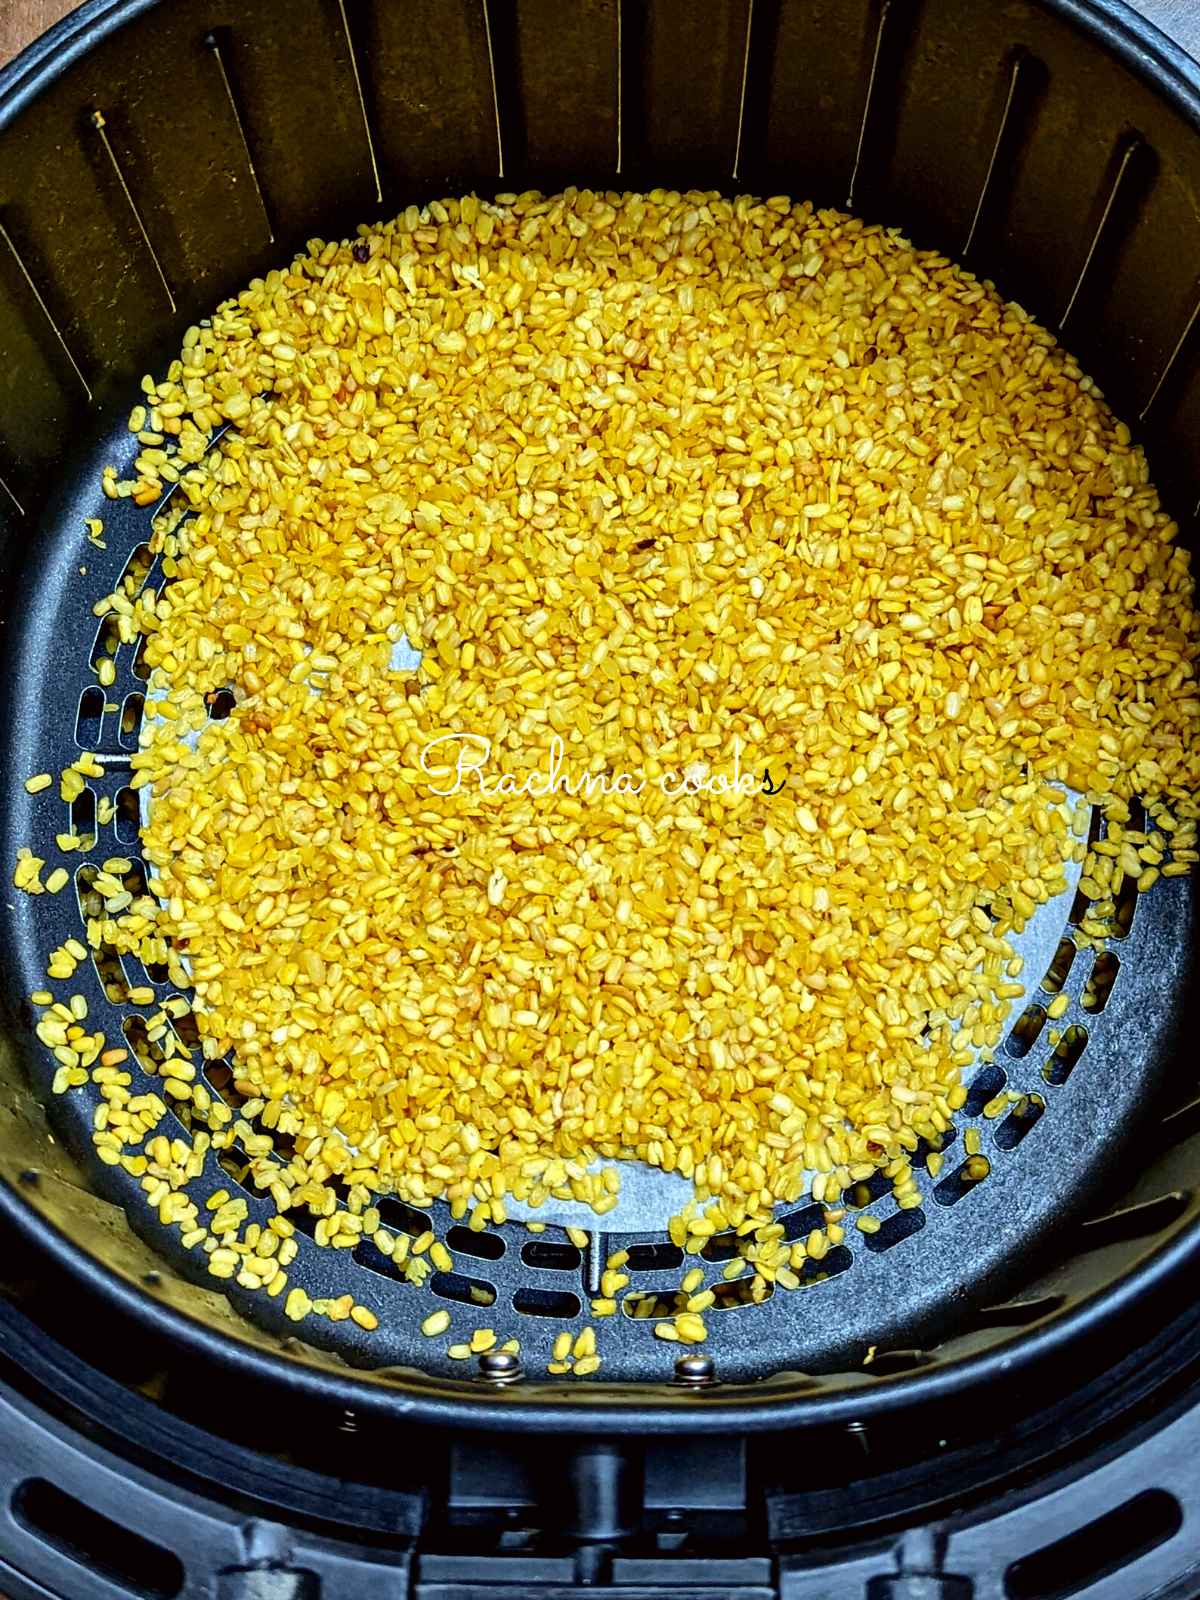 Moong dal after air frying.